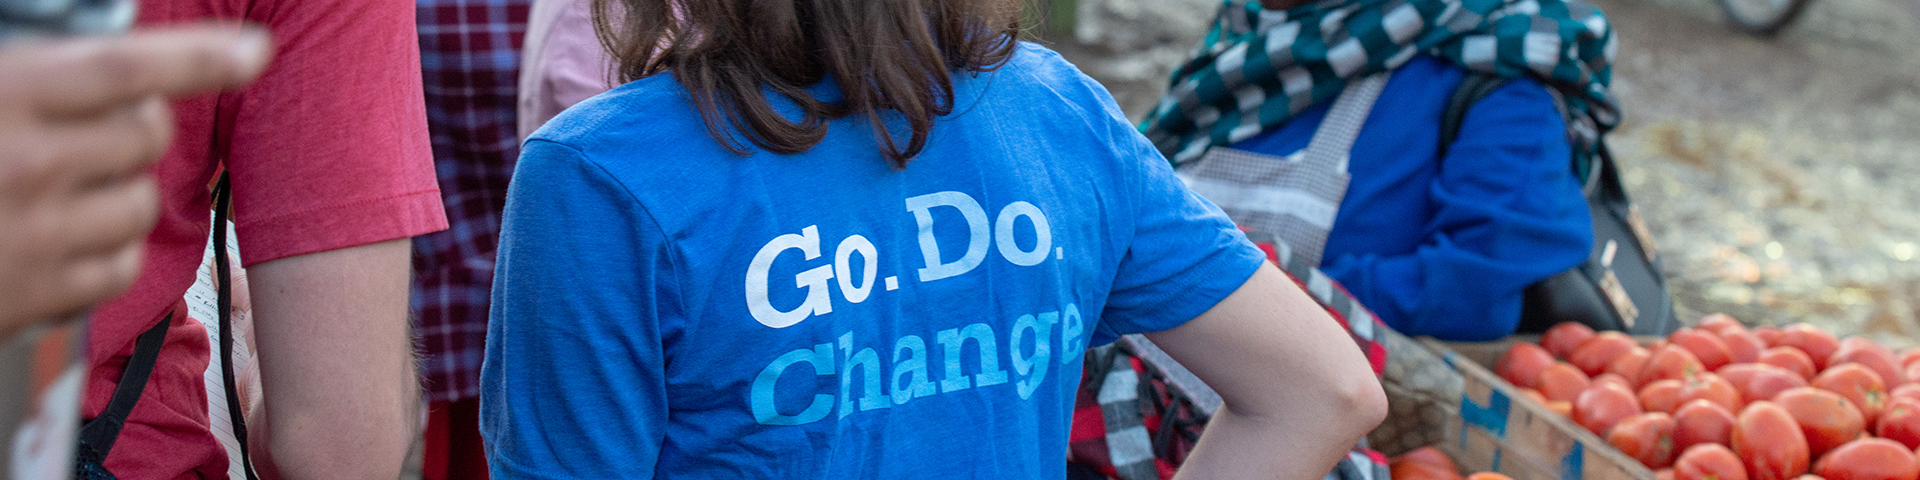 Person wearing a blue shirt that says Go. Do. Change. 